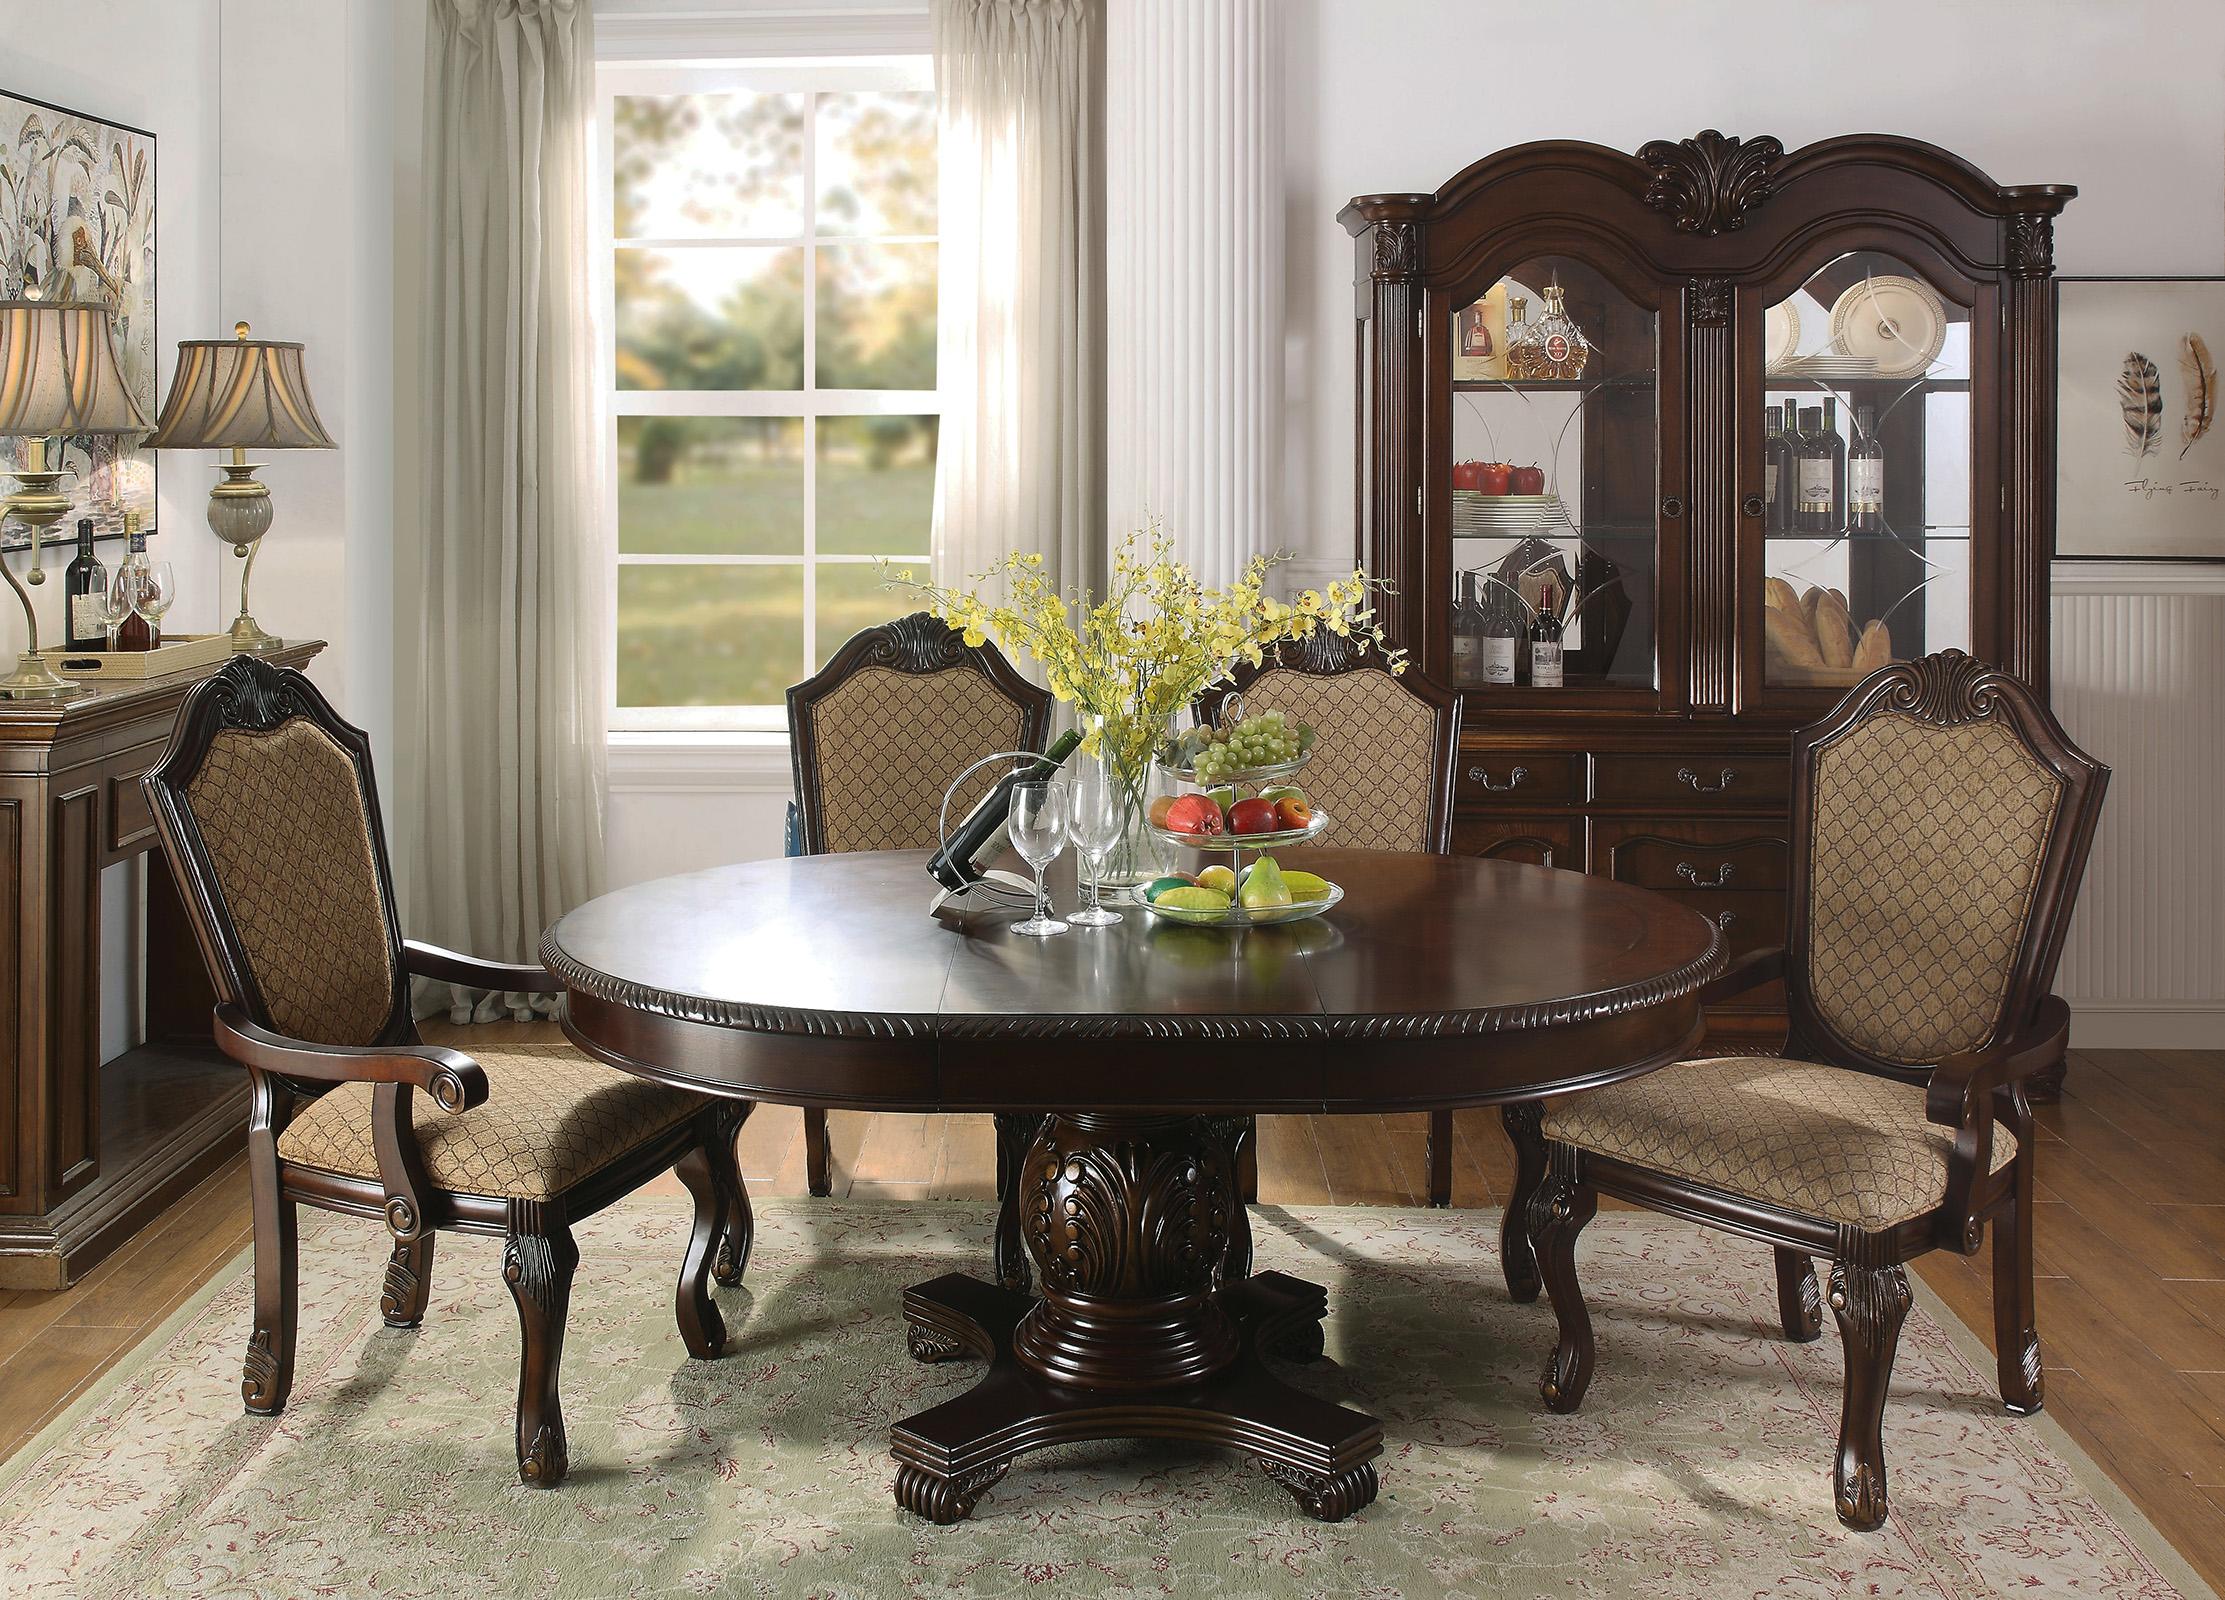 Classic, Traditional Dining Table Set 64175 Chateau De Ville 64175-Set-5 in Nutmeg, Espresso Fabric